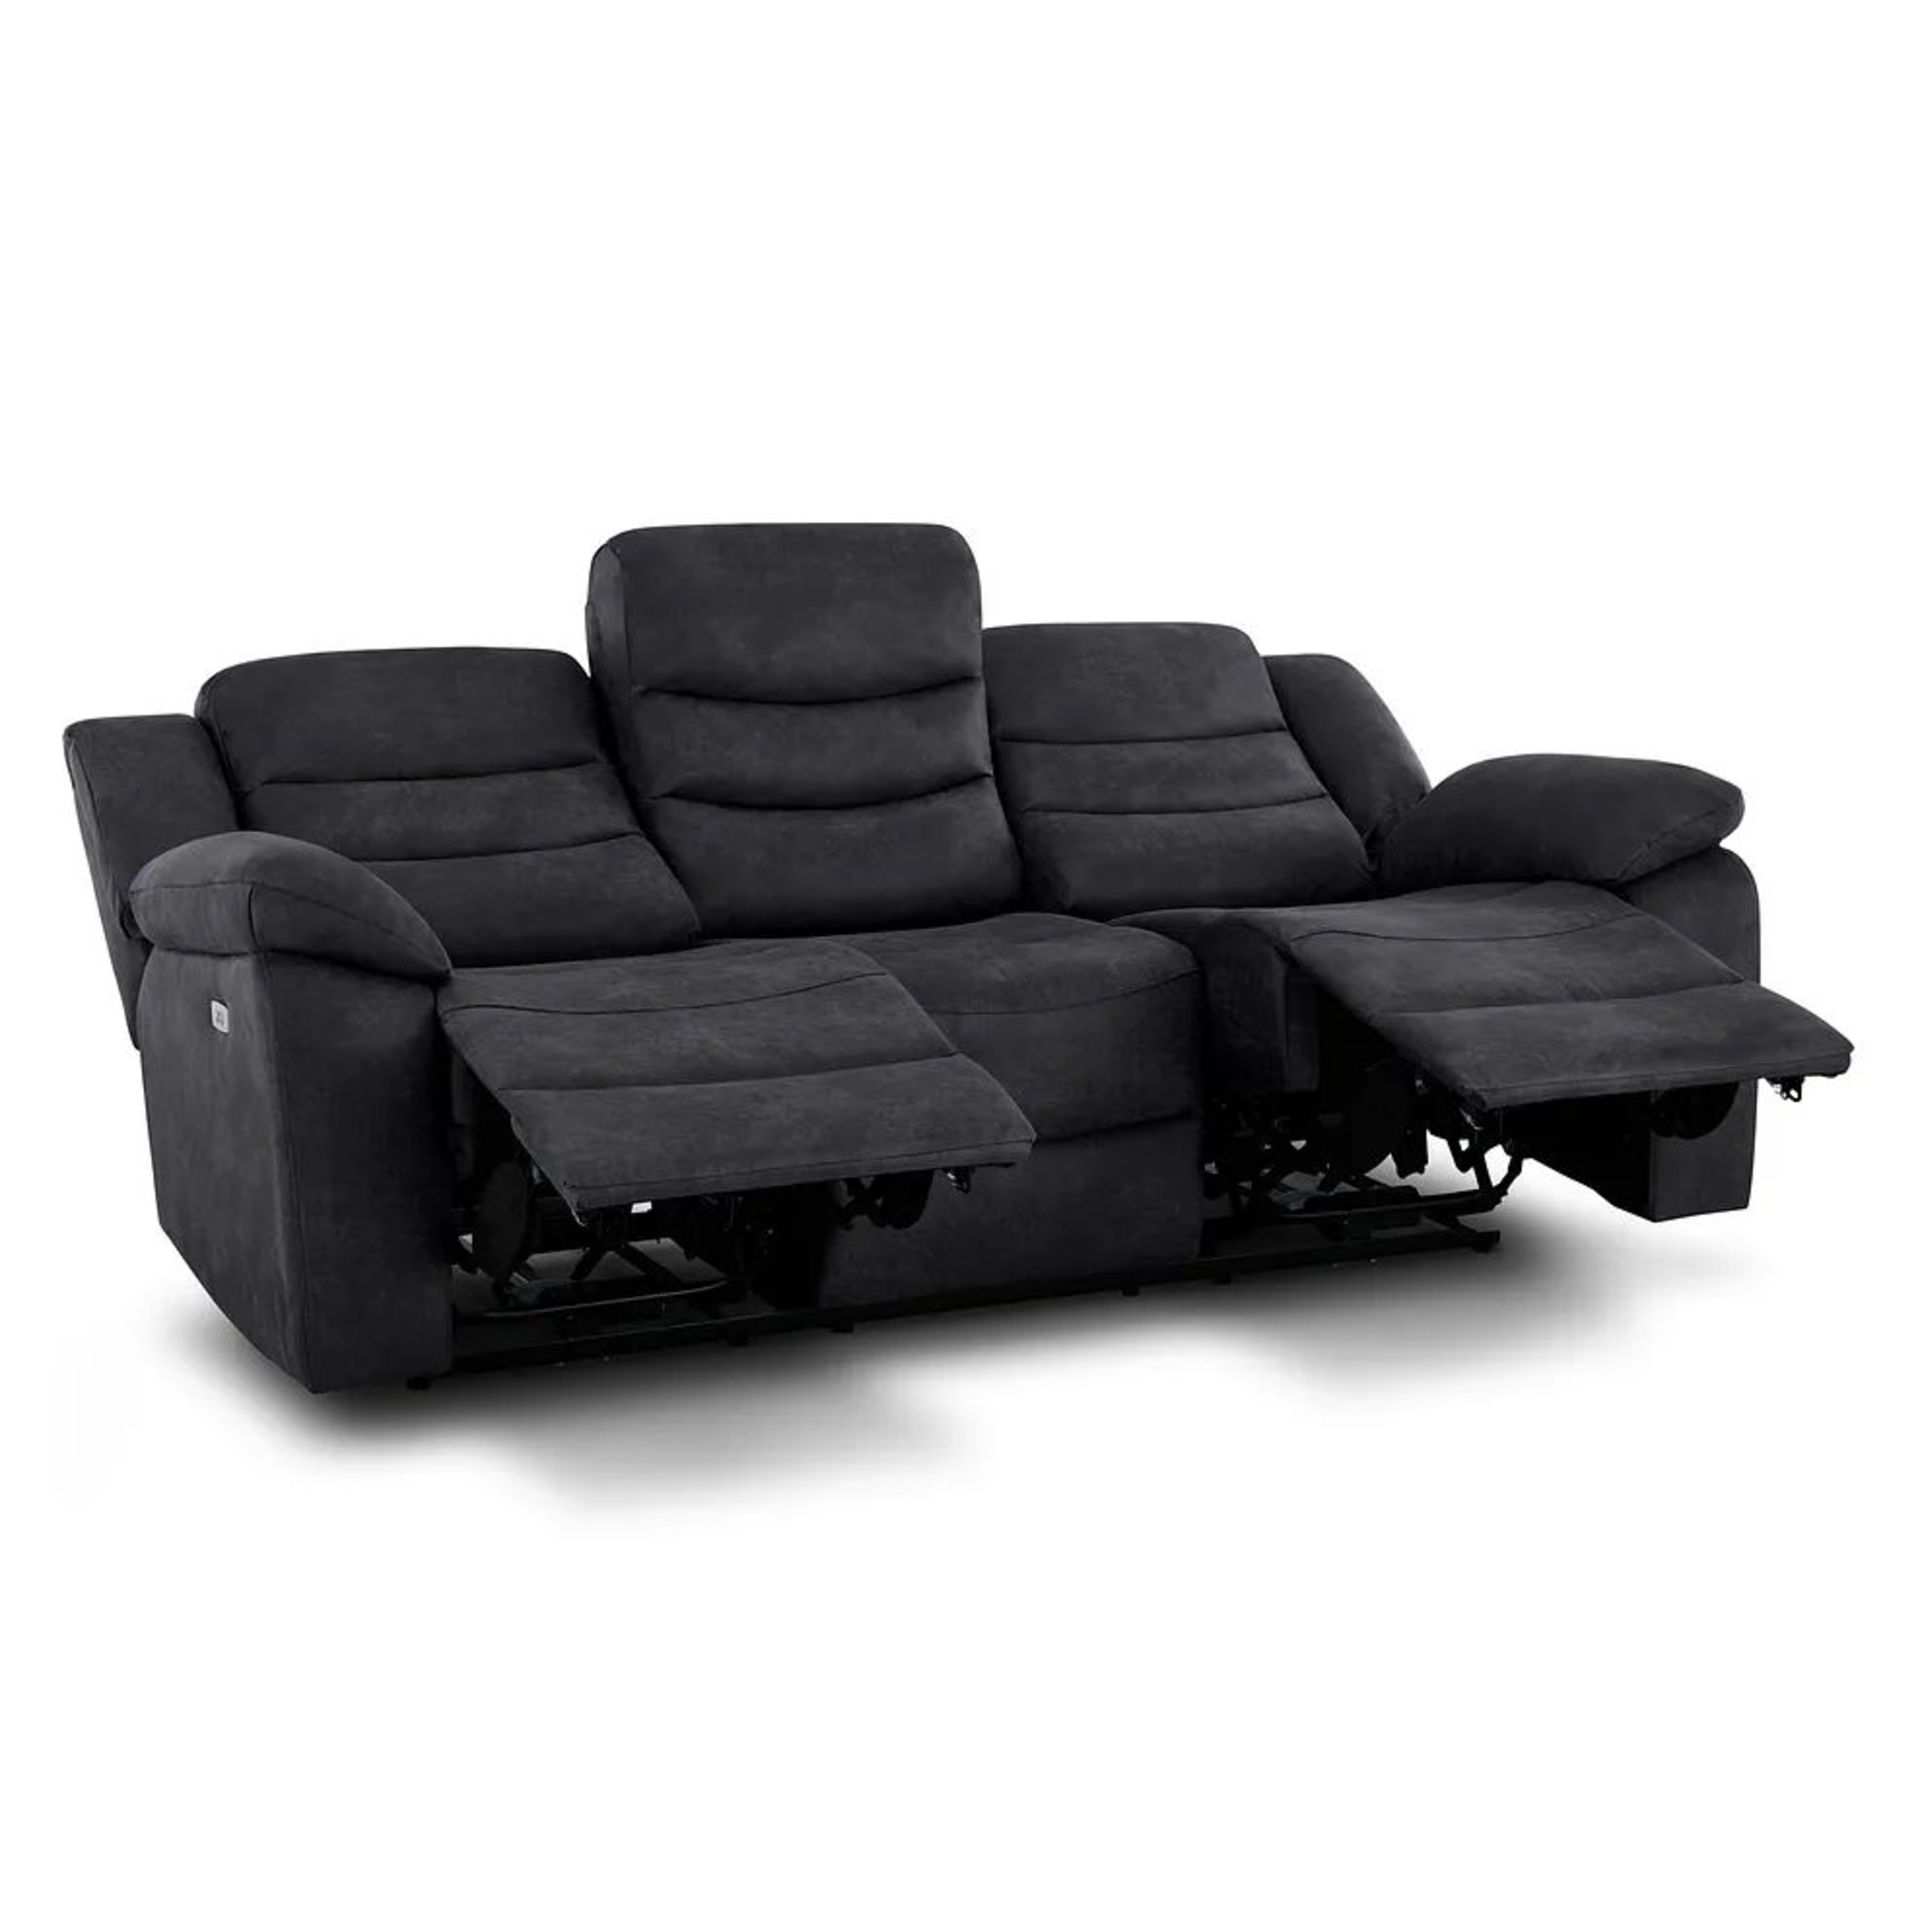 BRAND NEW MARLOW 3 Seater Electric Recliner Sofa - MILLER GREY FABRIC. RRP £1199. Designed to suit - Image 5 of 12